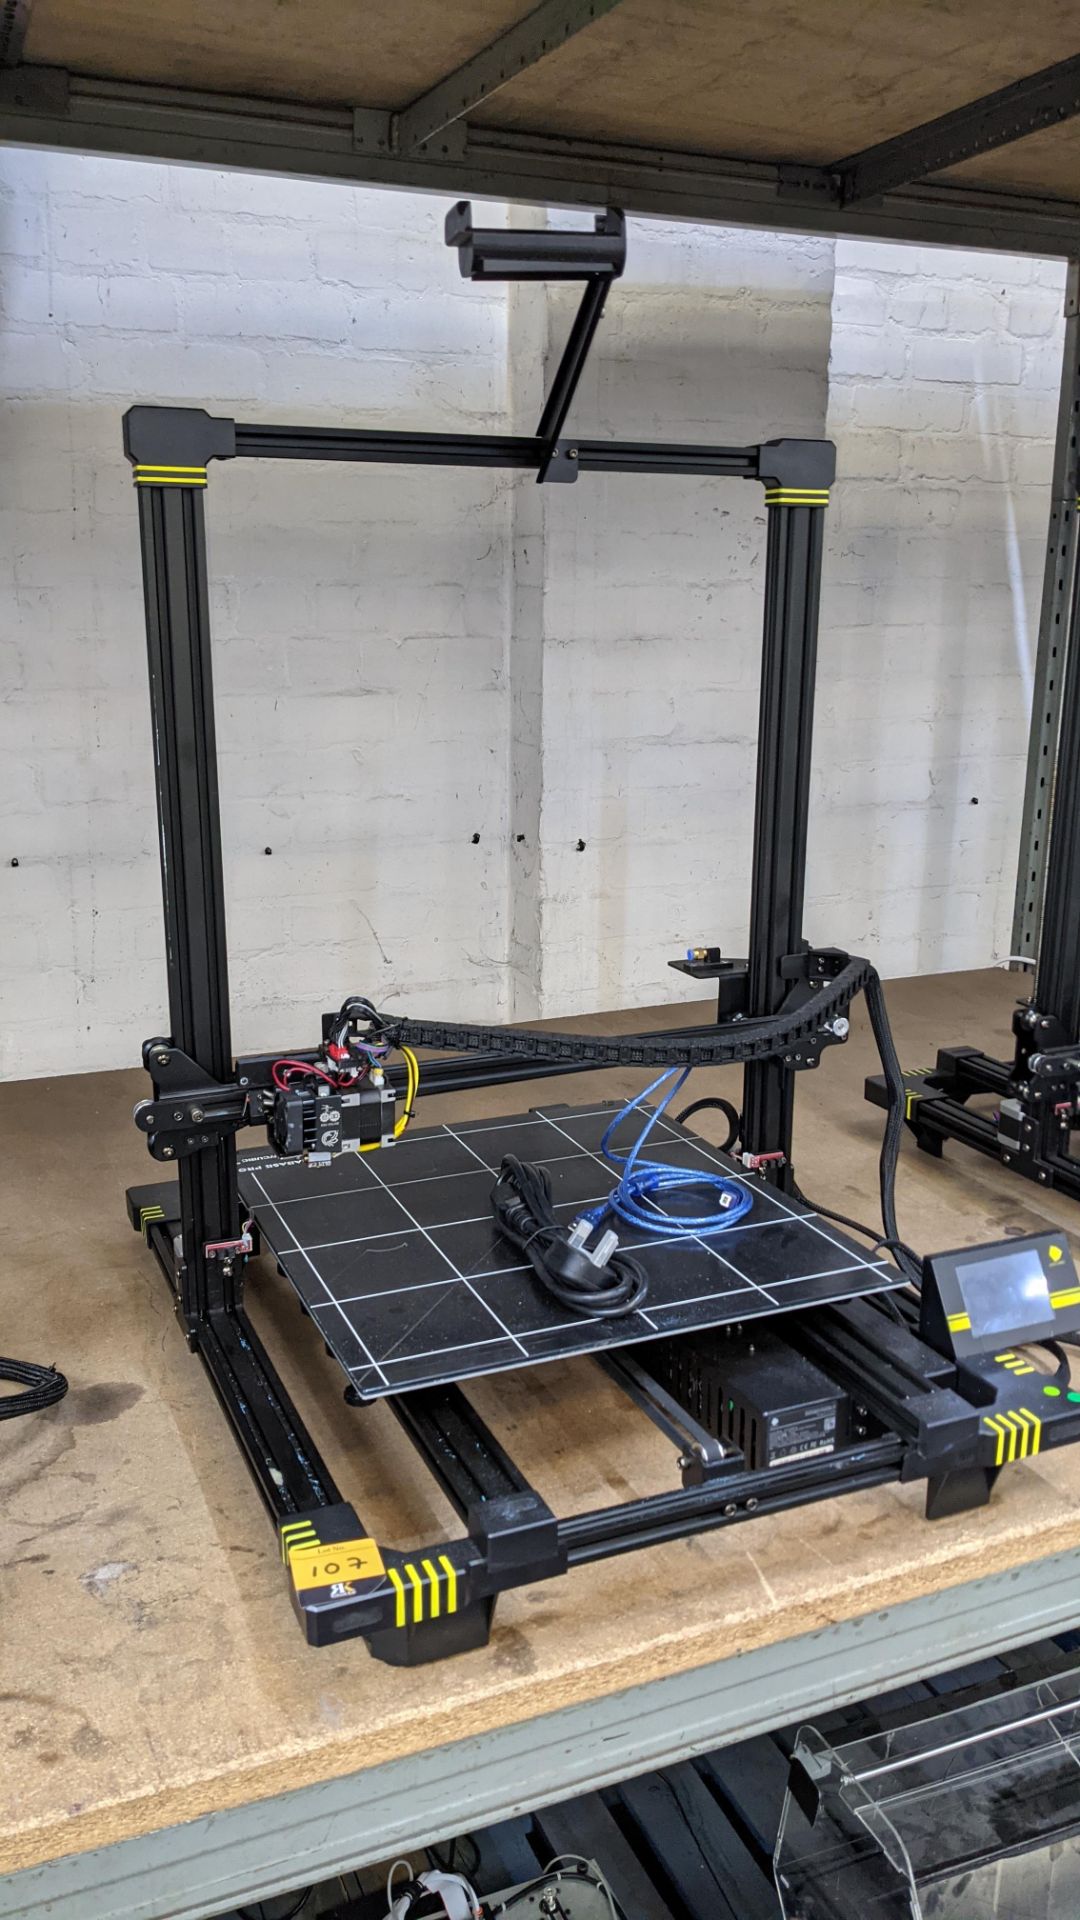 Anycubic Chiron 3D printer NB Lots 104 - 125 each consist of a similar 3D printer. We bel - Image 2 of 14